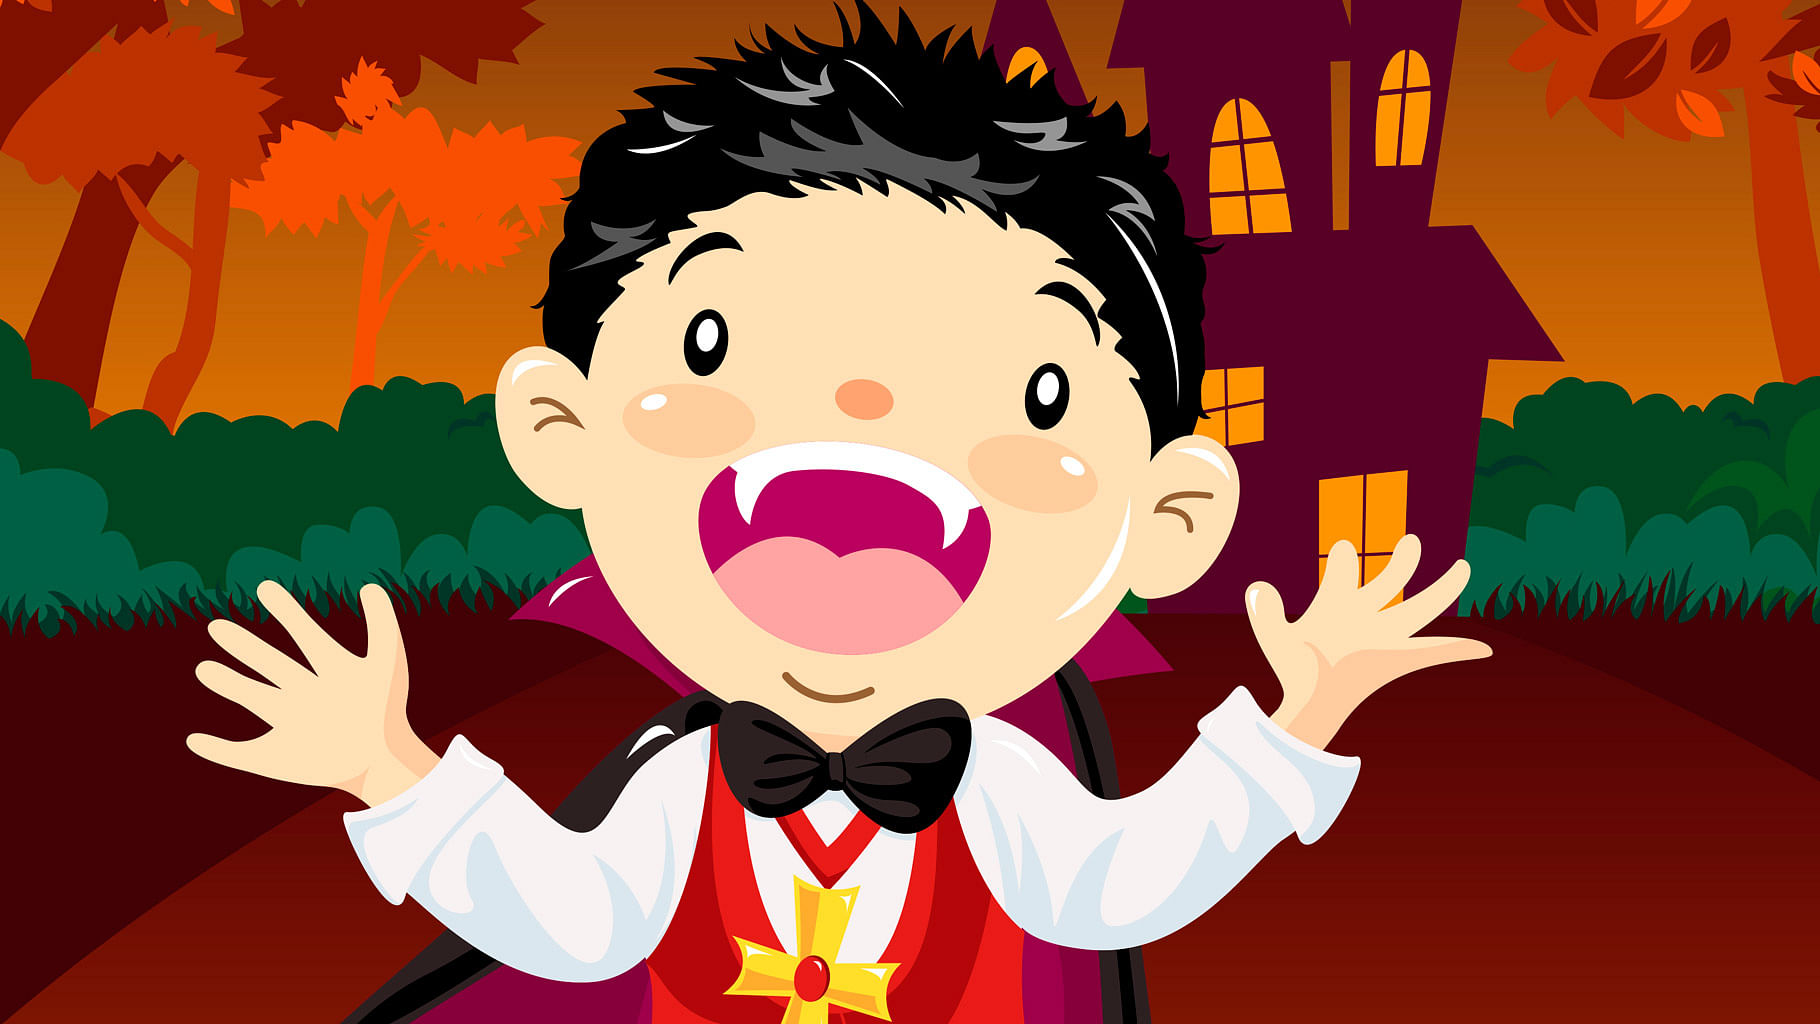 It’s Dracula’s 119th Birthday. He’s turned into a brat. So we’re scaring him with stories of monsters from India. (Photo: iStock)